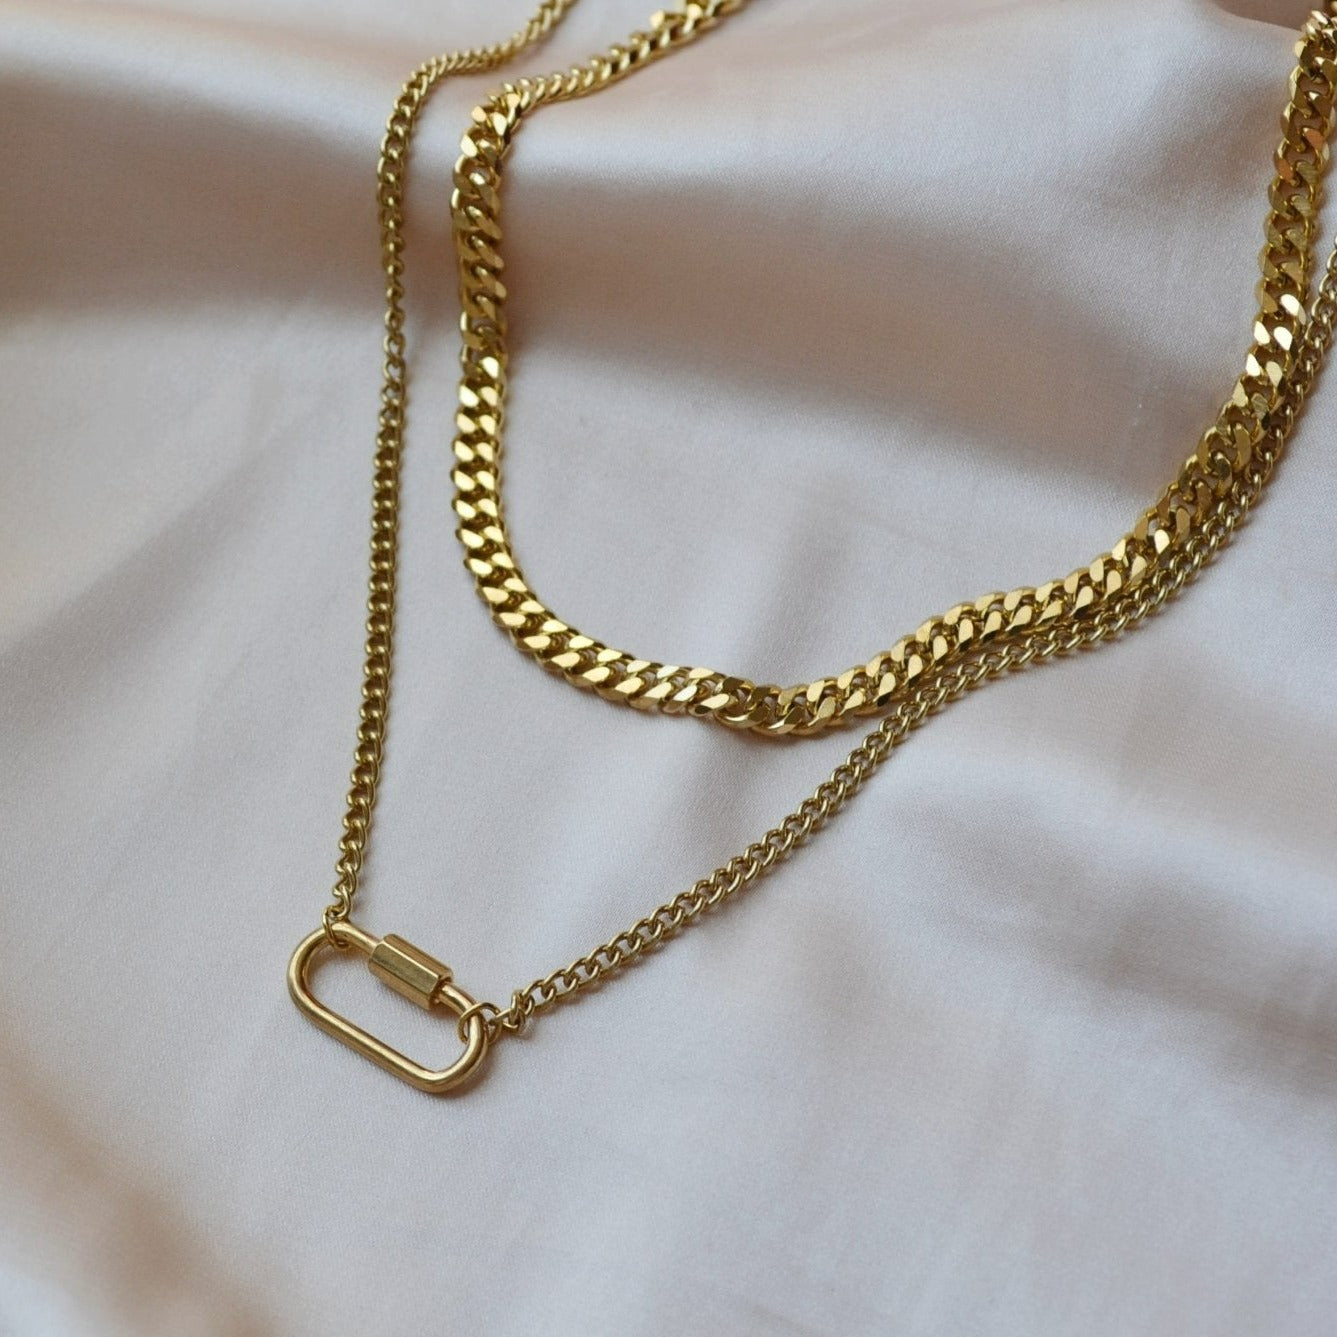 Link Chain Carabiner Lock Necklace - Gold